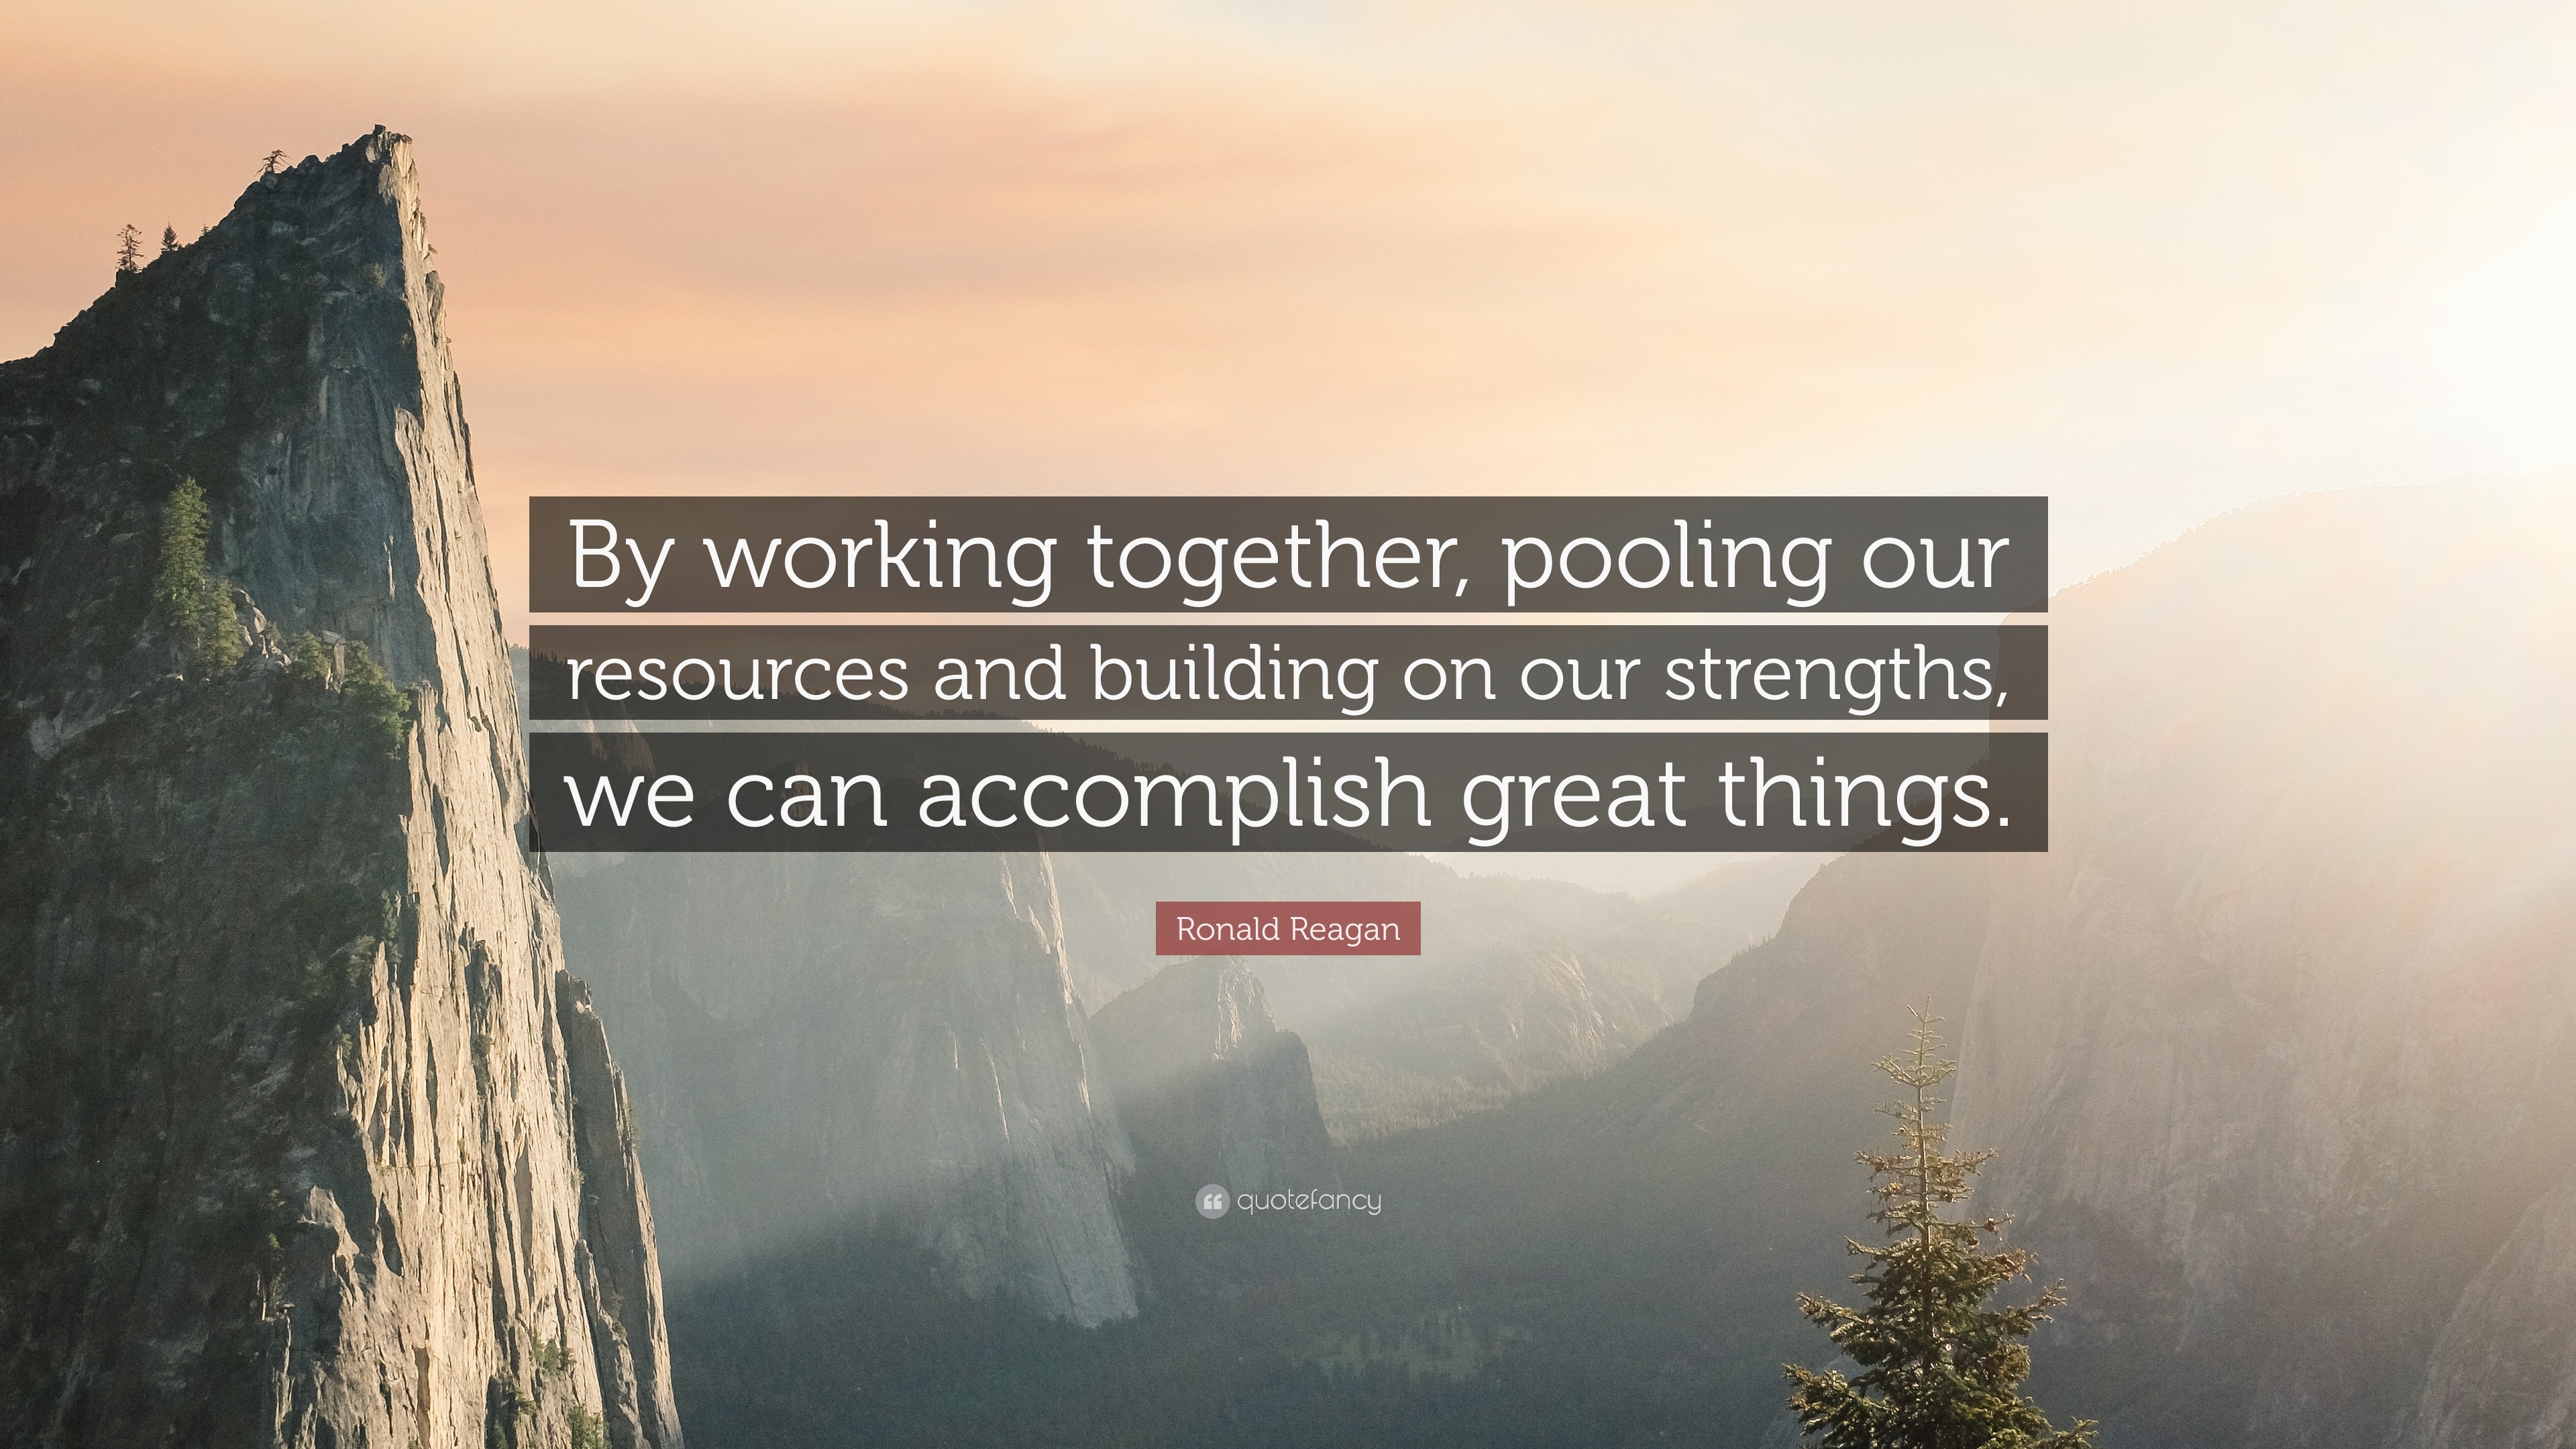 40 Quotes About Helping Others to Inspire Togetherness